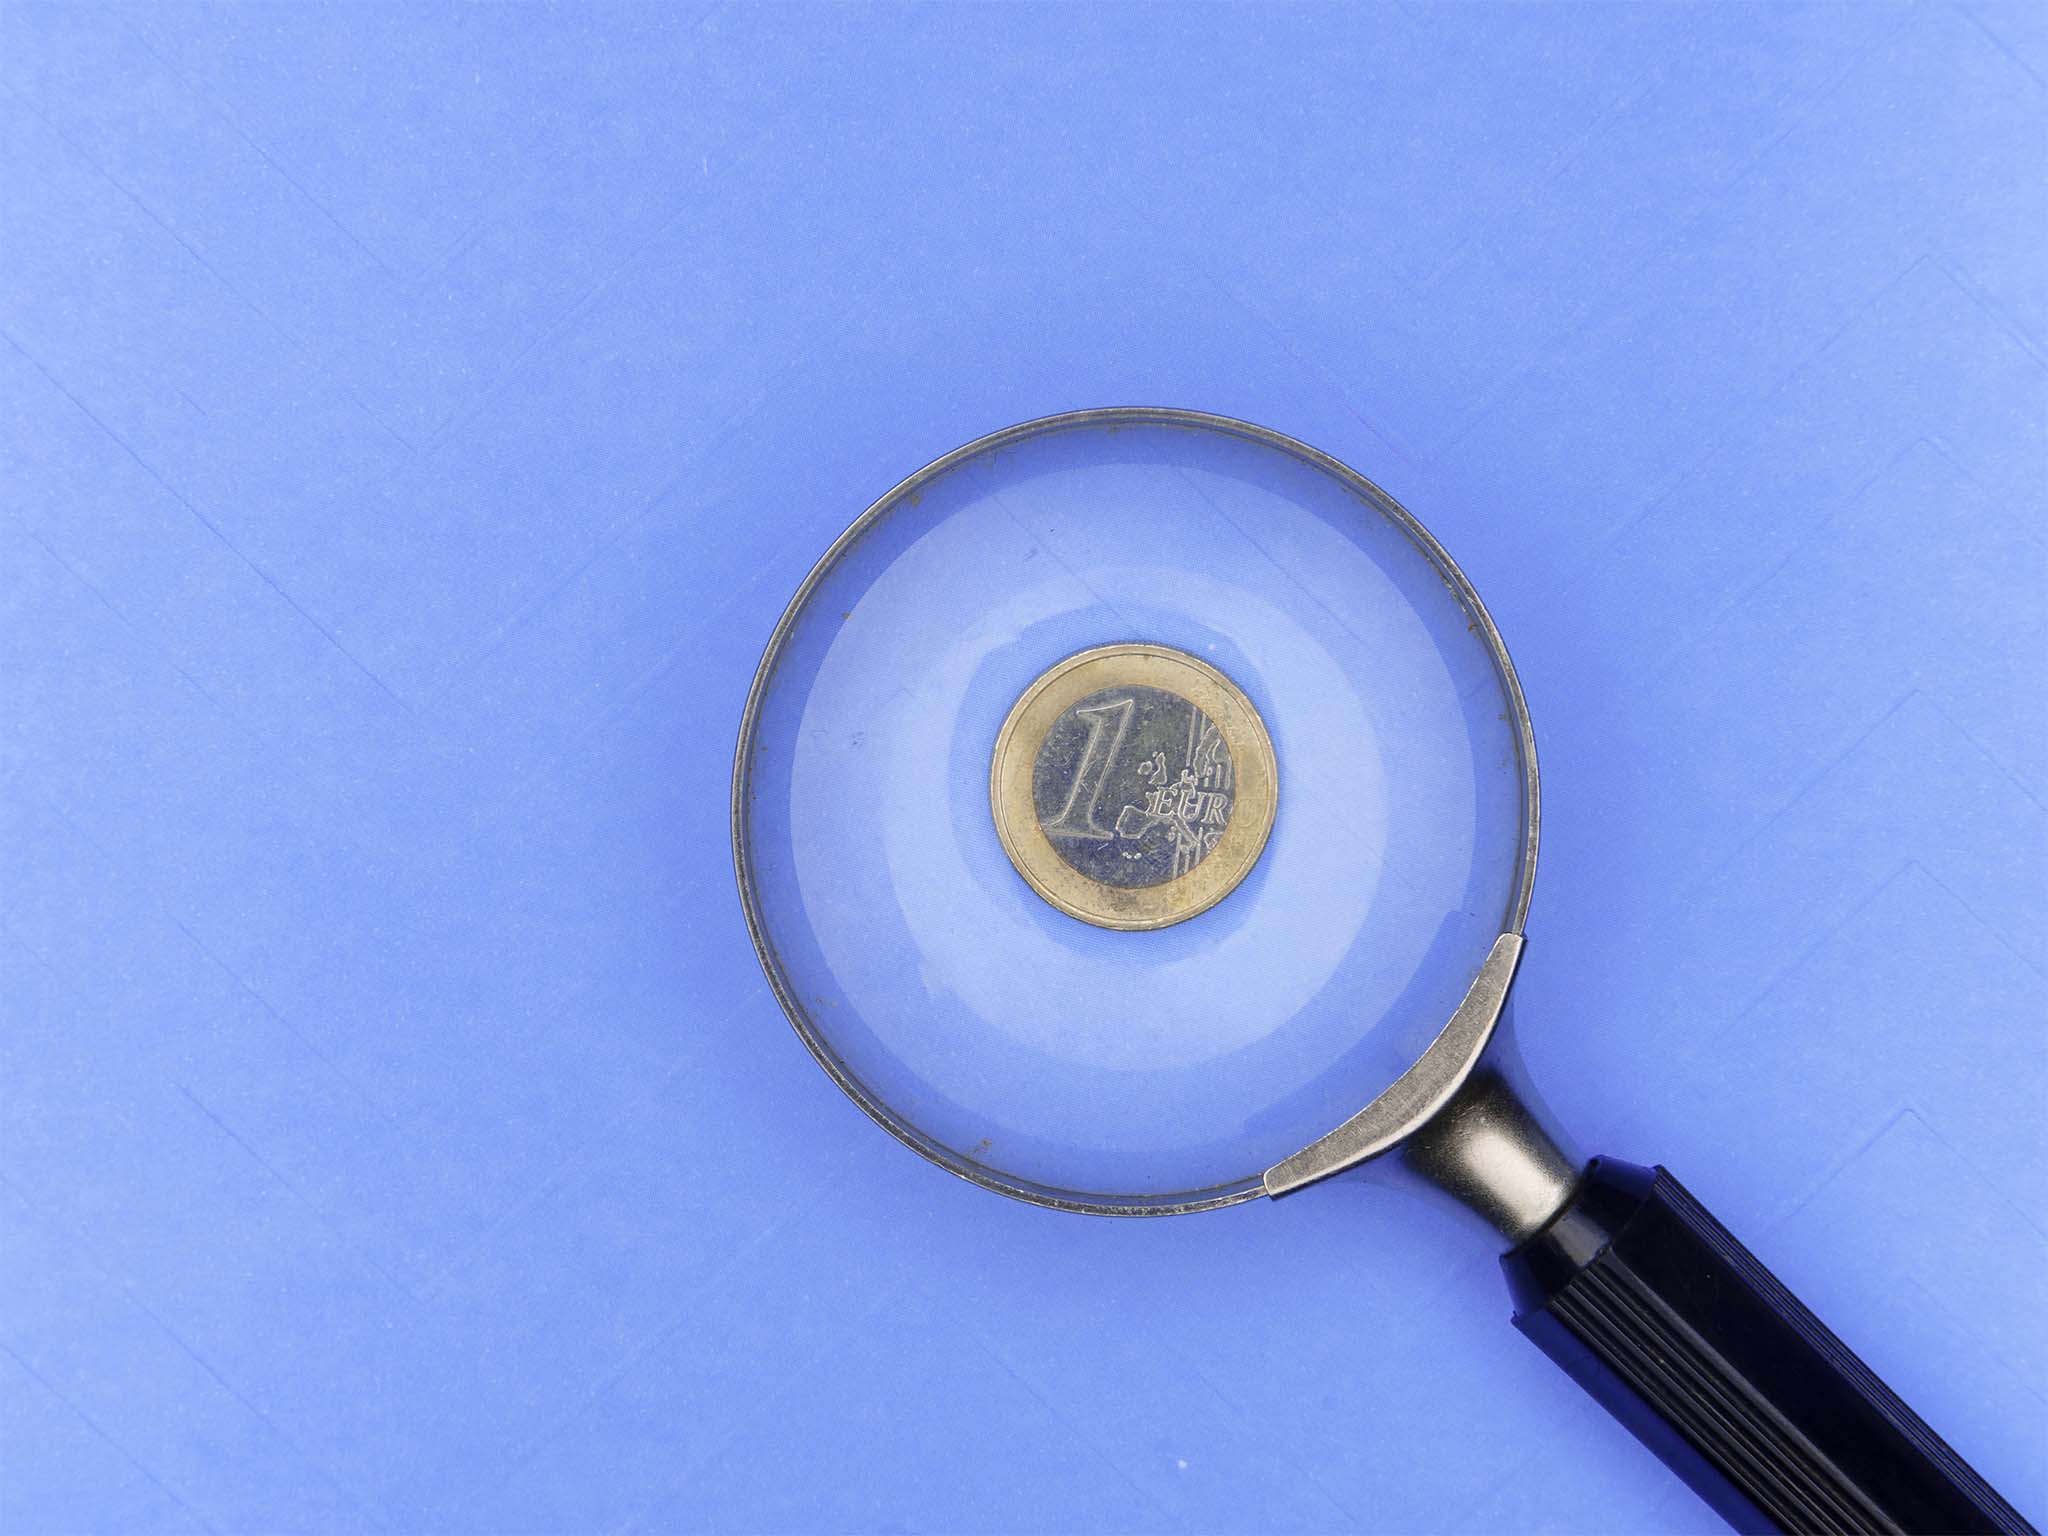 Magnifying glass over euro piece on blue background.